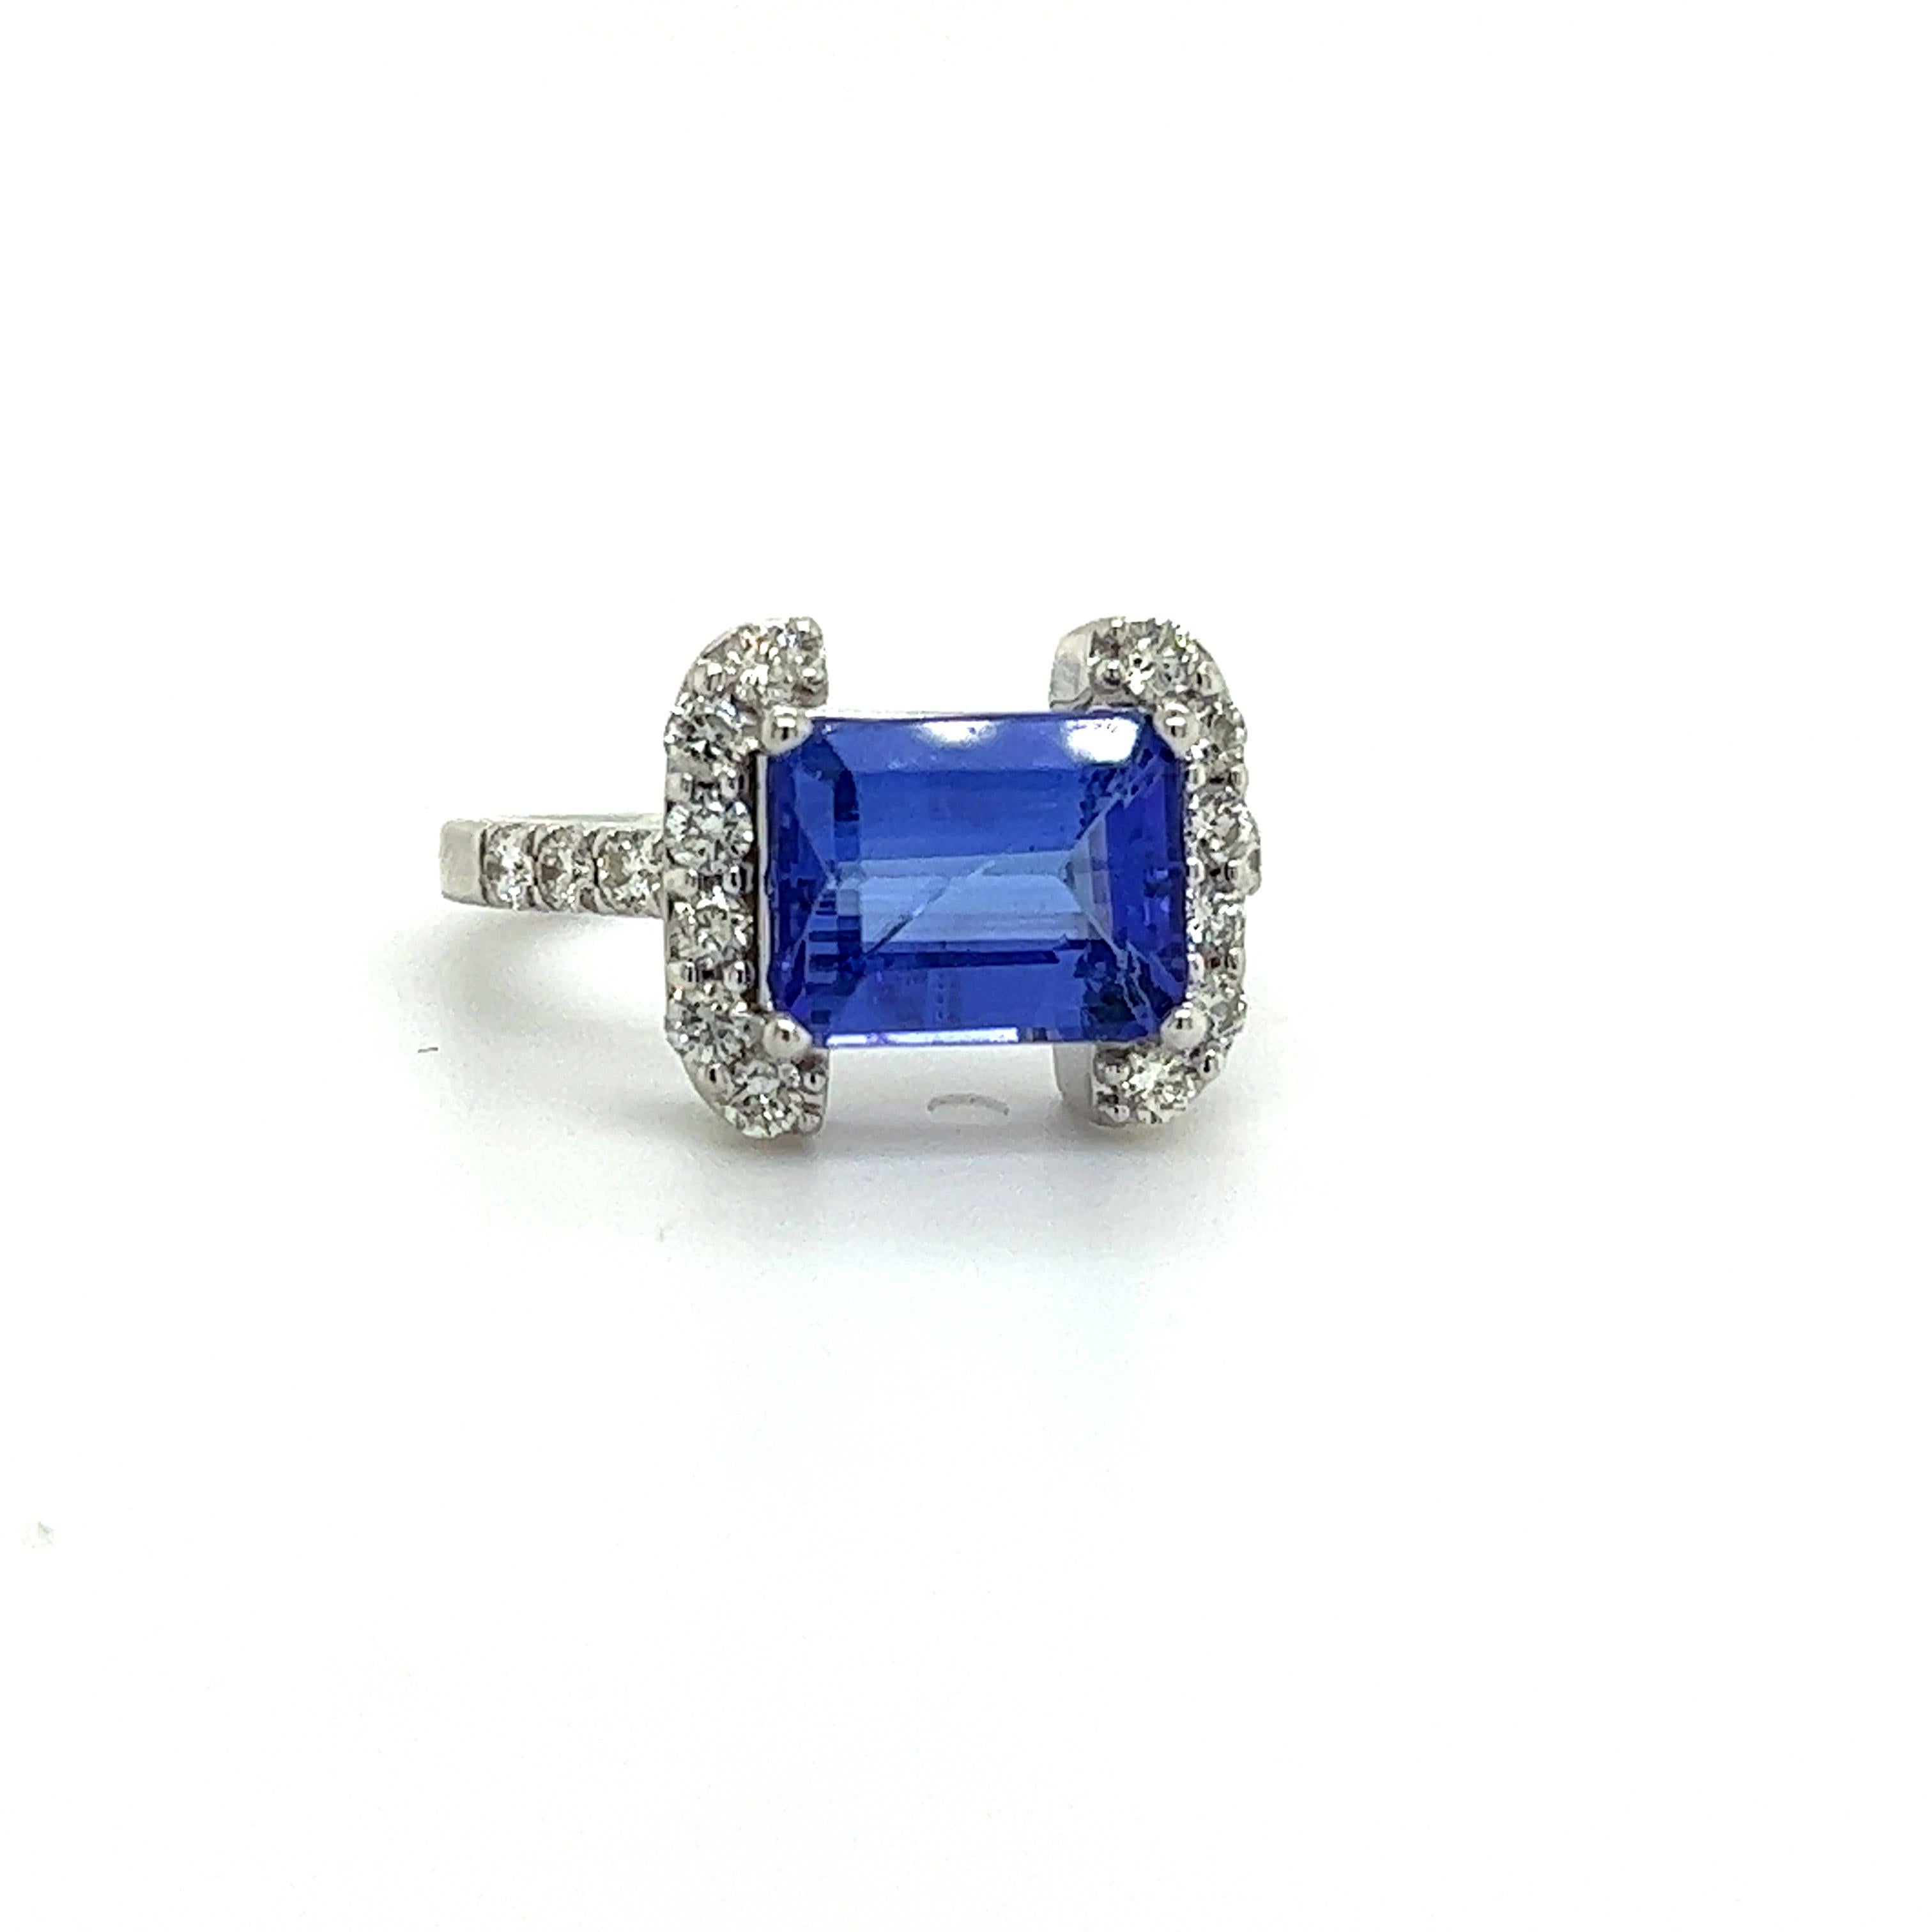 Natural Tanzanite Diamond Ring Size 14k W Gold 3.89 TCW Certified For Sale 5